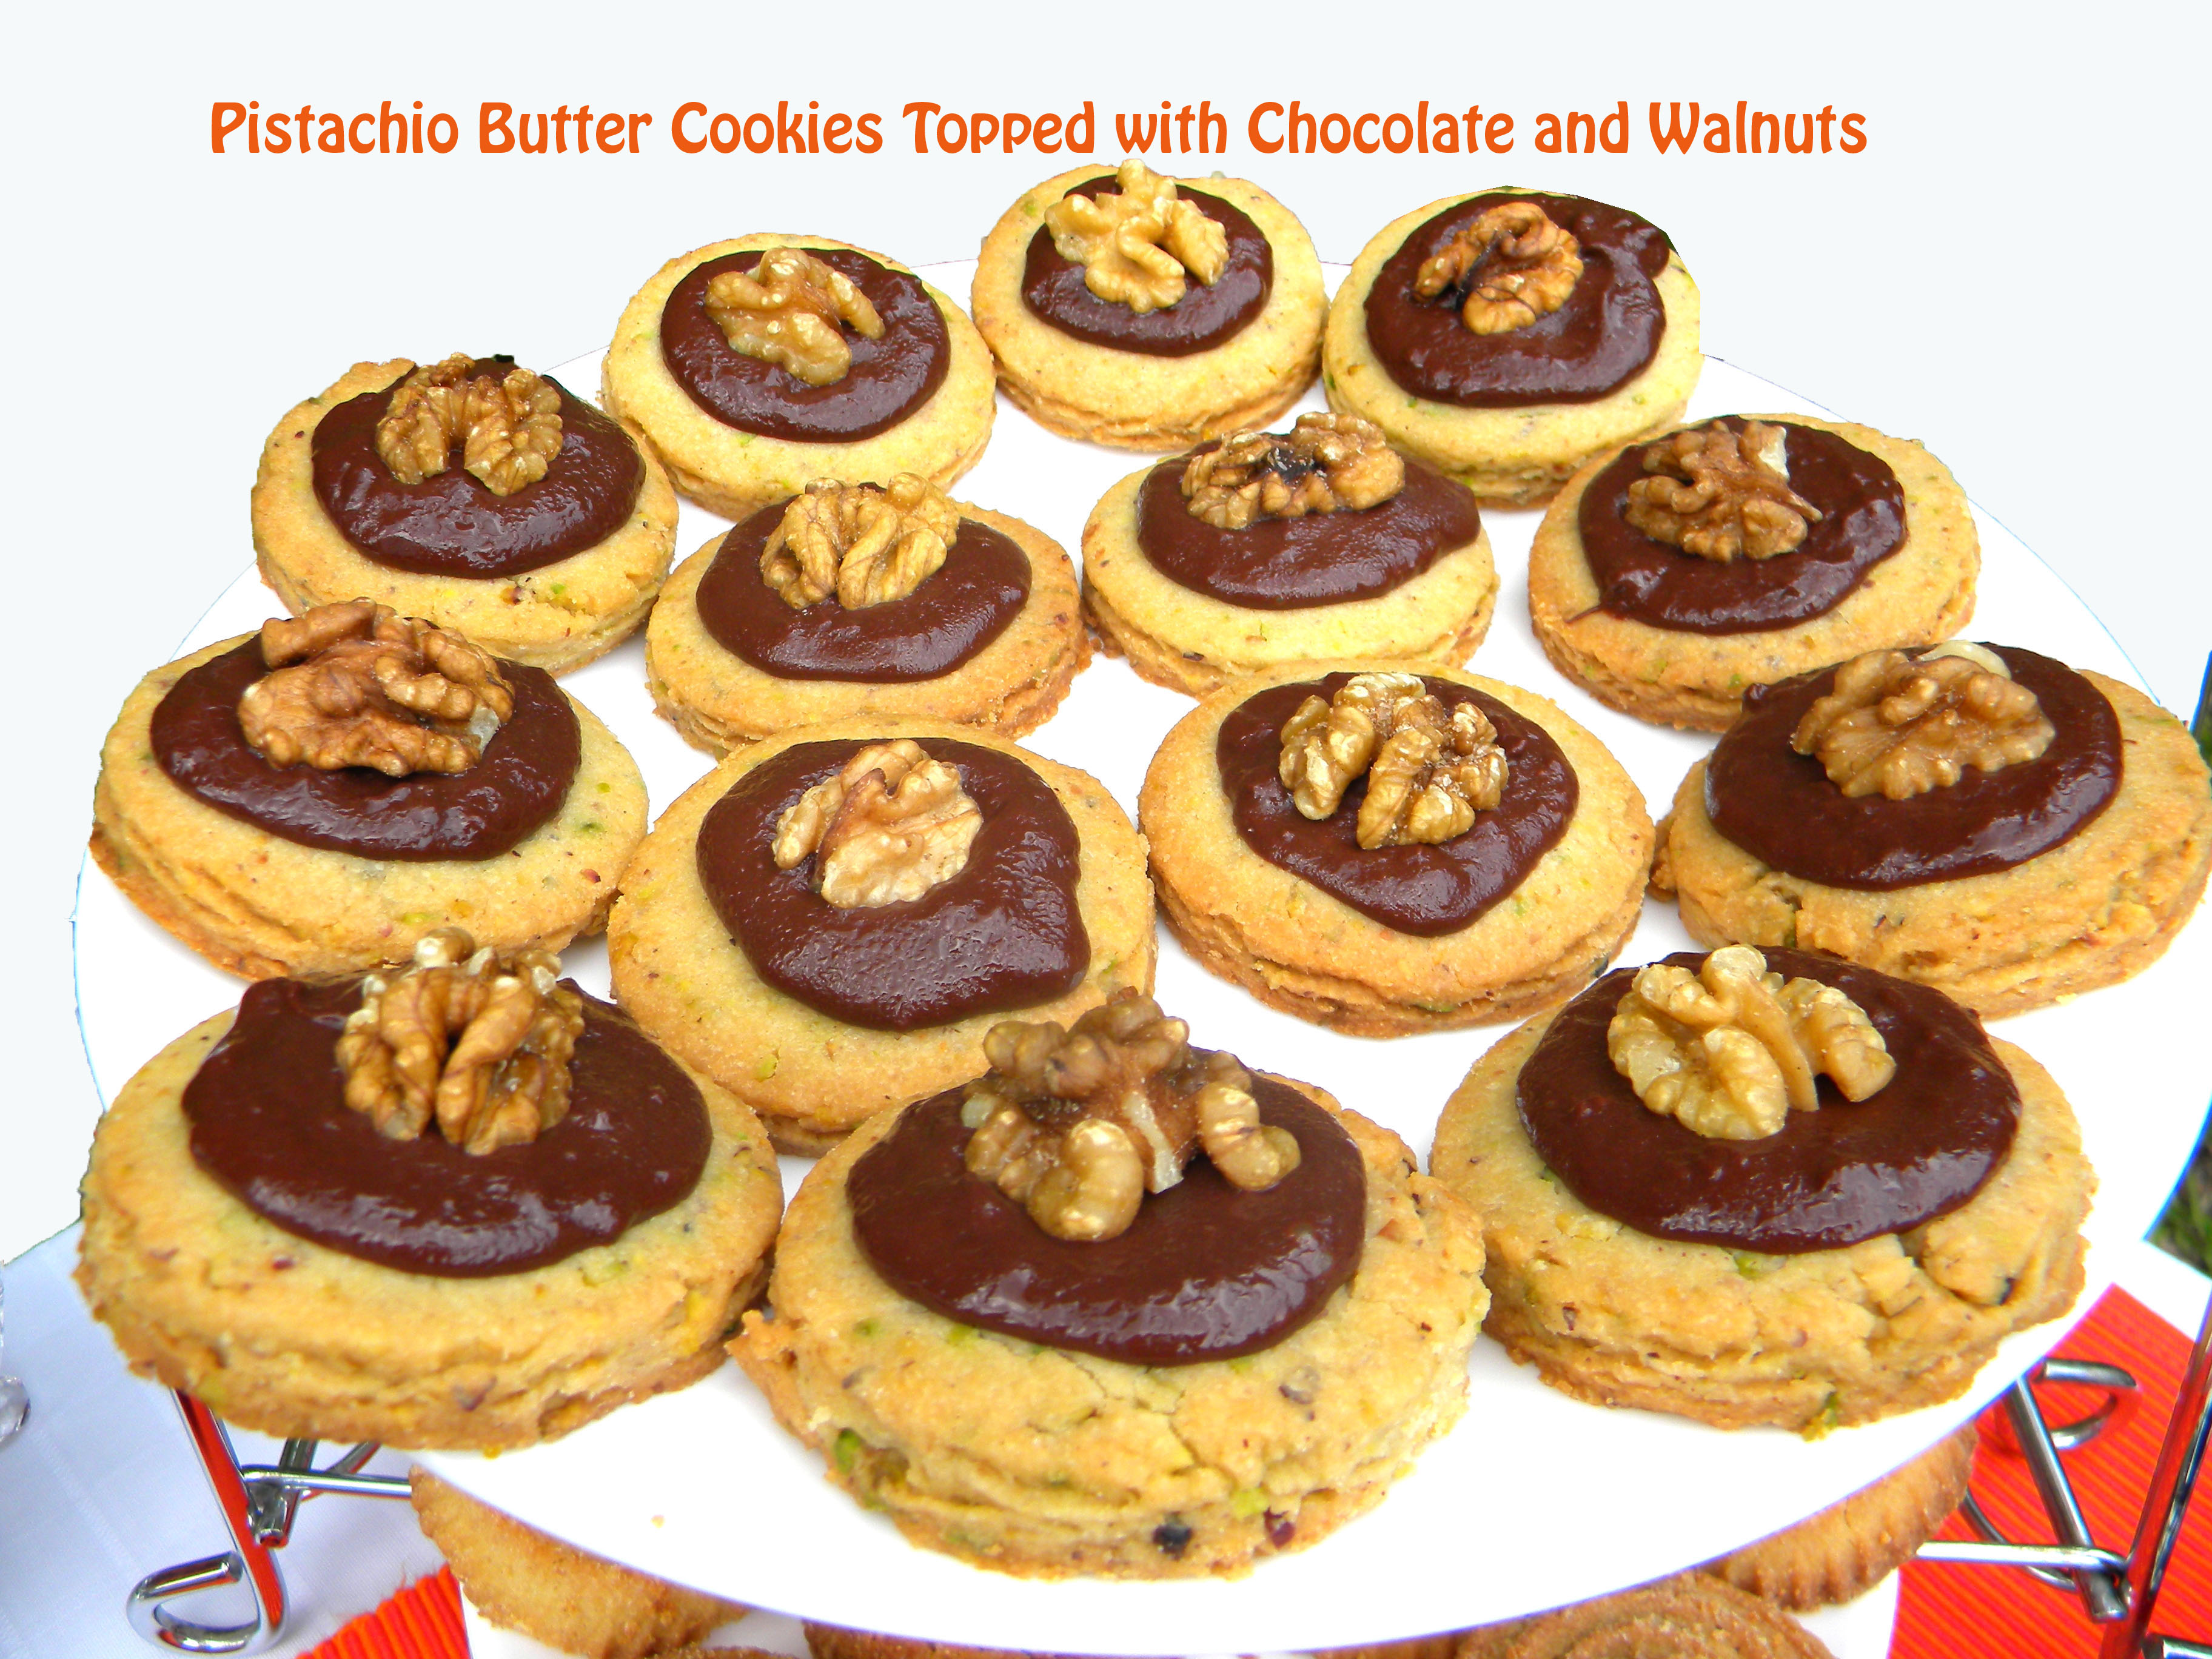 Pistachio Butter Cookies Topped with Chocolate and Walnuts